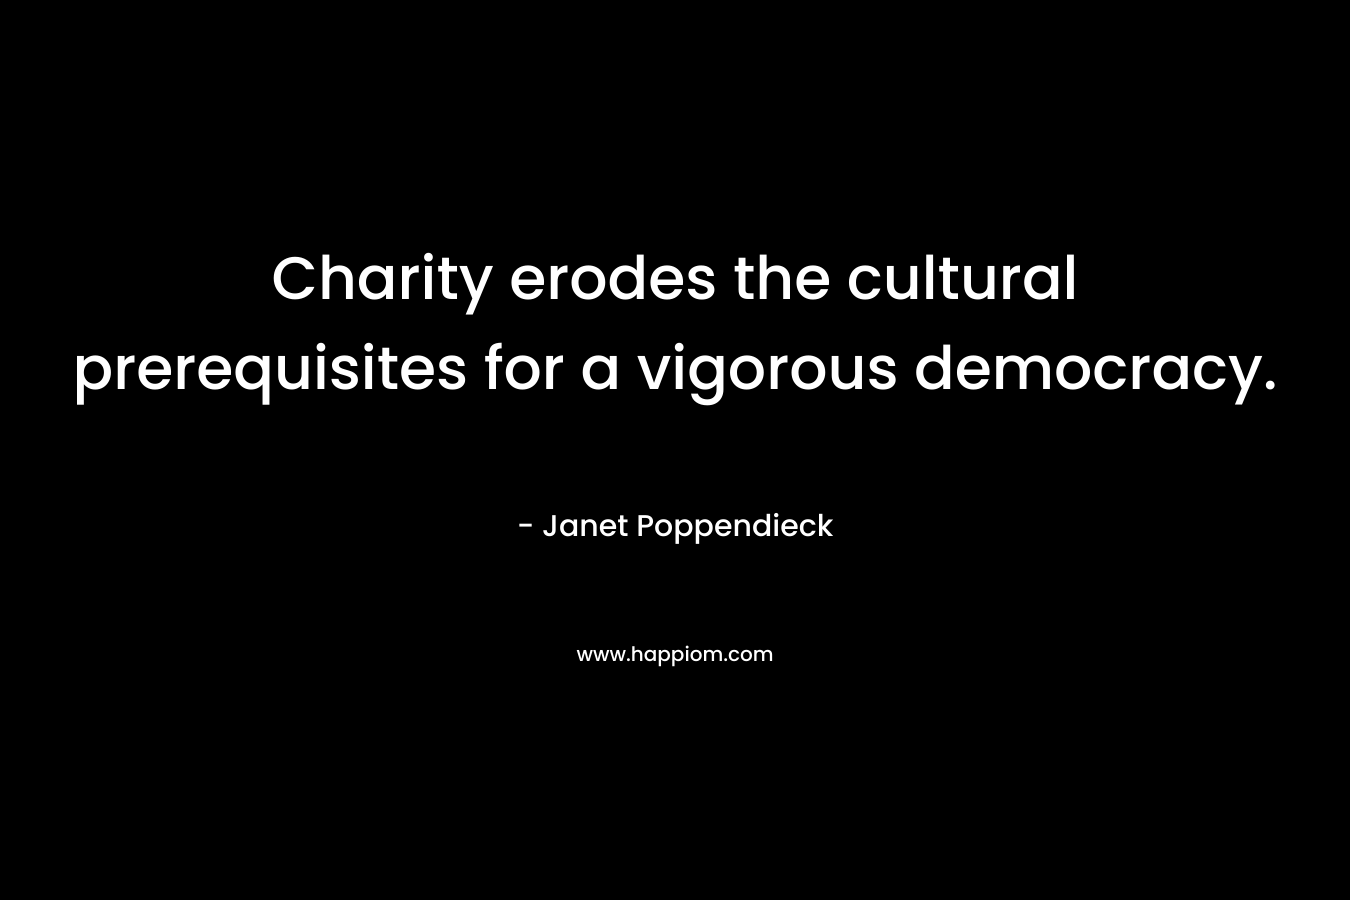 Charity erodes the cultural prerequisites for a vigorous democracy. – Janet Poppendieck